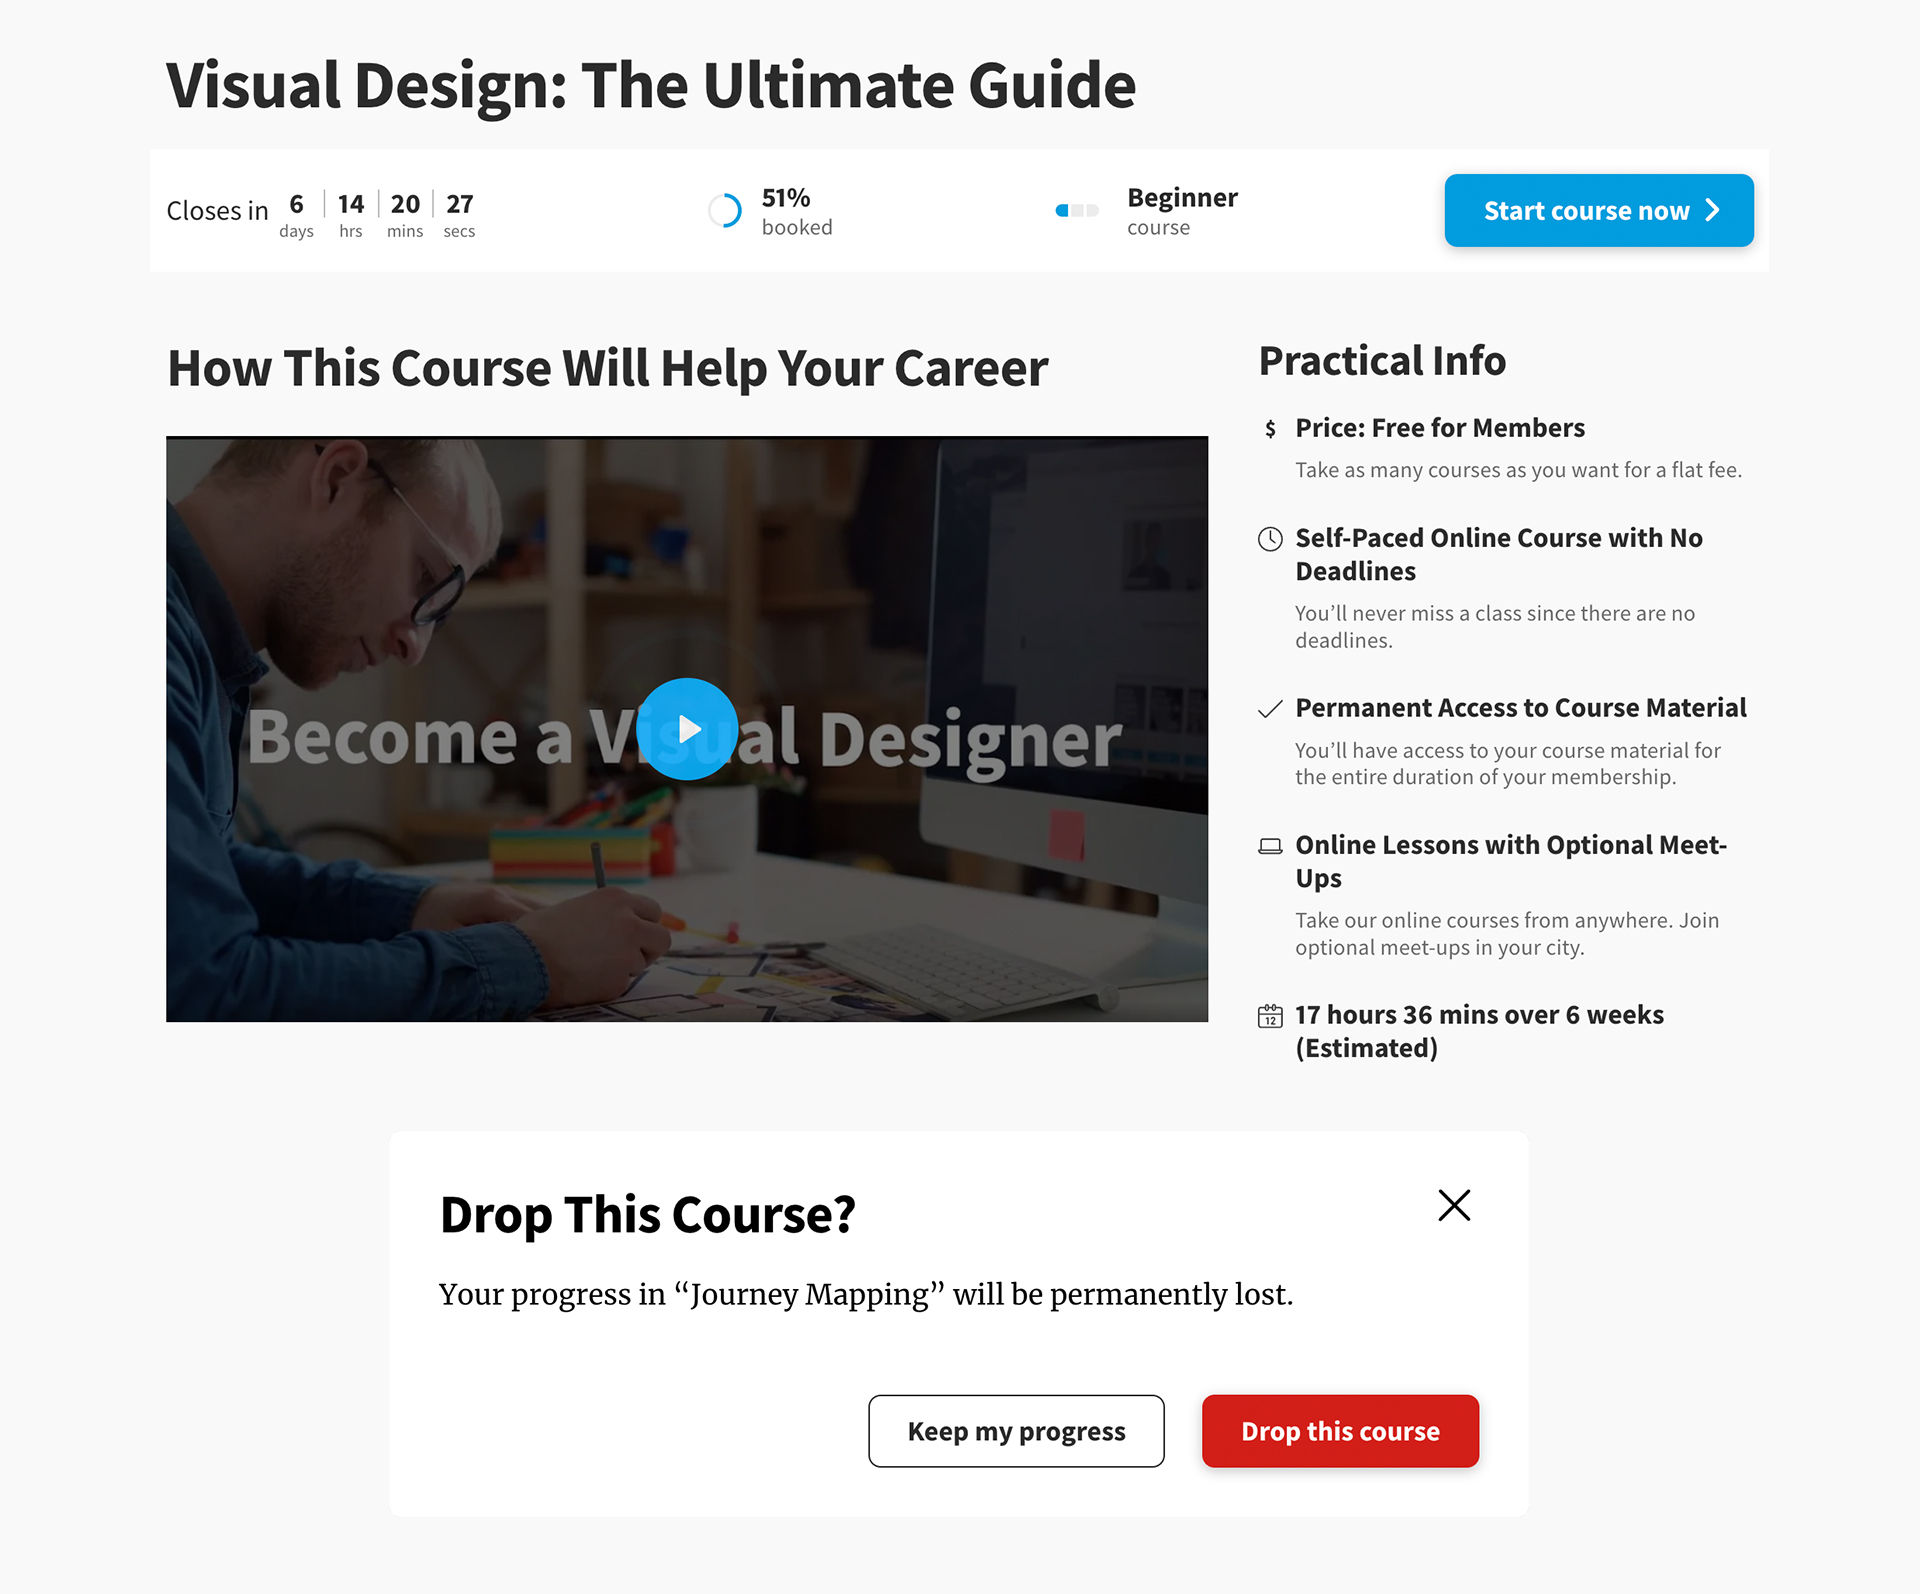 A screenshot of an Interaction Design Foundation course page. It features information about the course and a video. Beneath this is a pop-up asking the user if they want to drop this course.